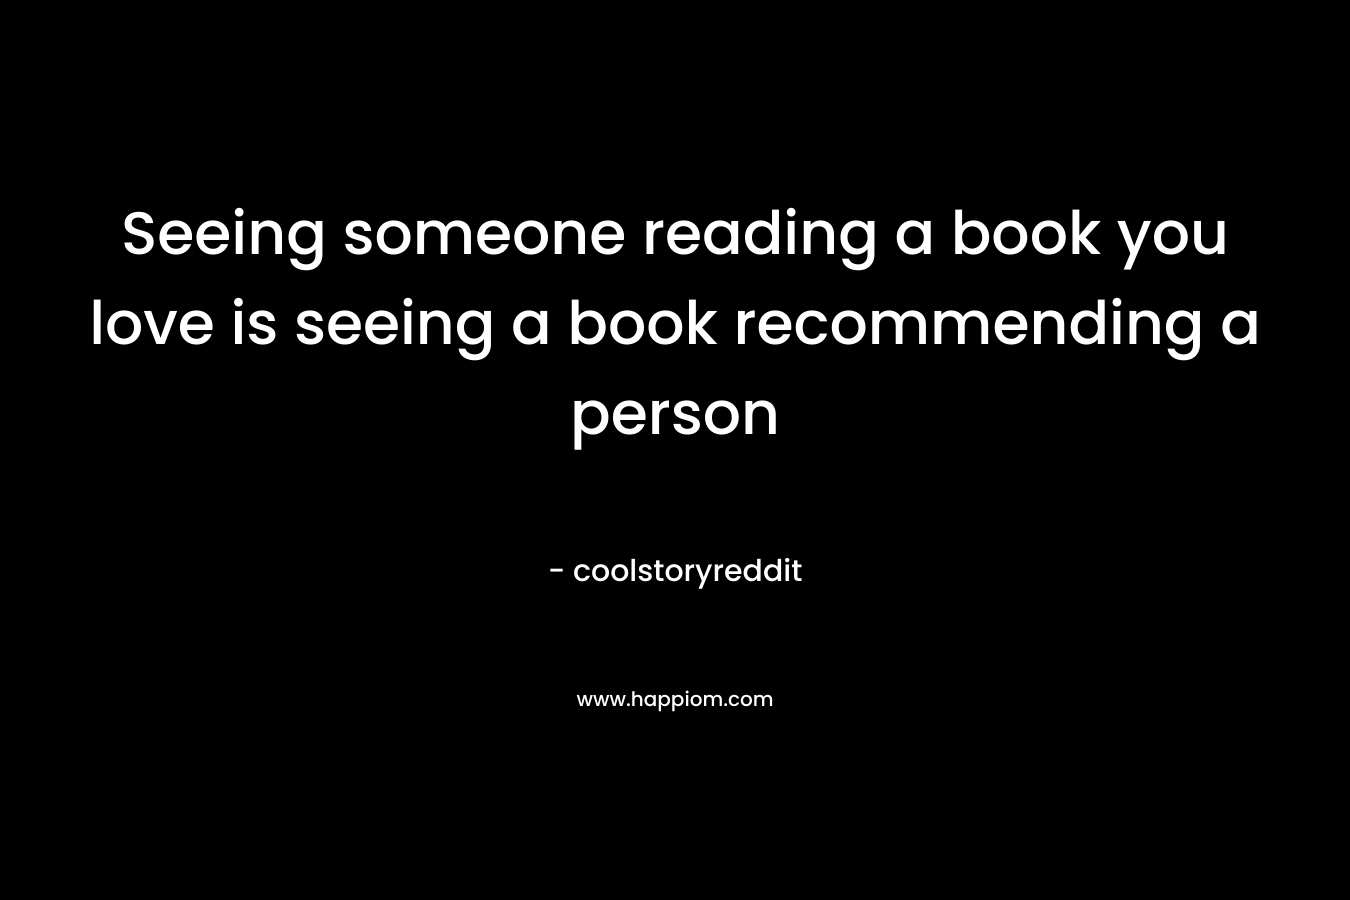 Seeing someone reading a book you love is seeing a book recommending a person